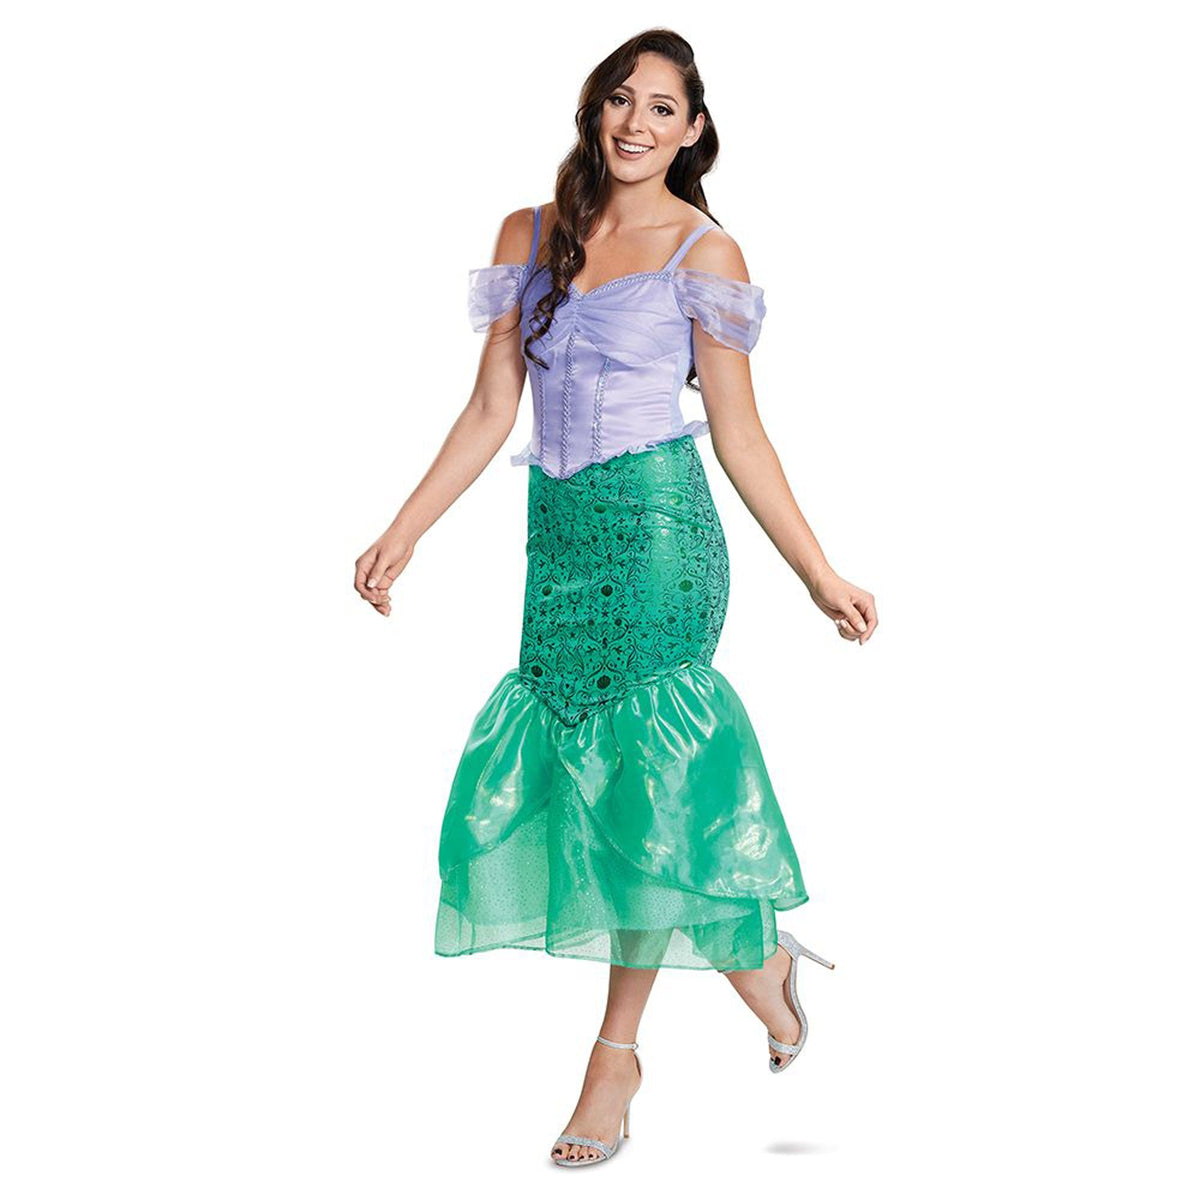 AMSCAN CA Costumes Disney the Little Mermaid Ariel Deluxe Costume for Adults, Green and Purple Dress